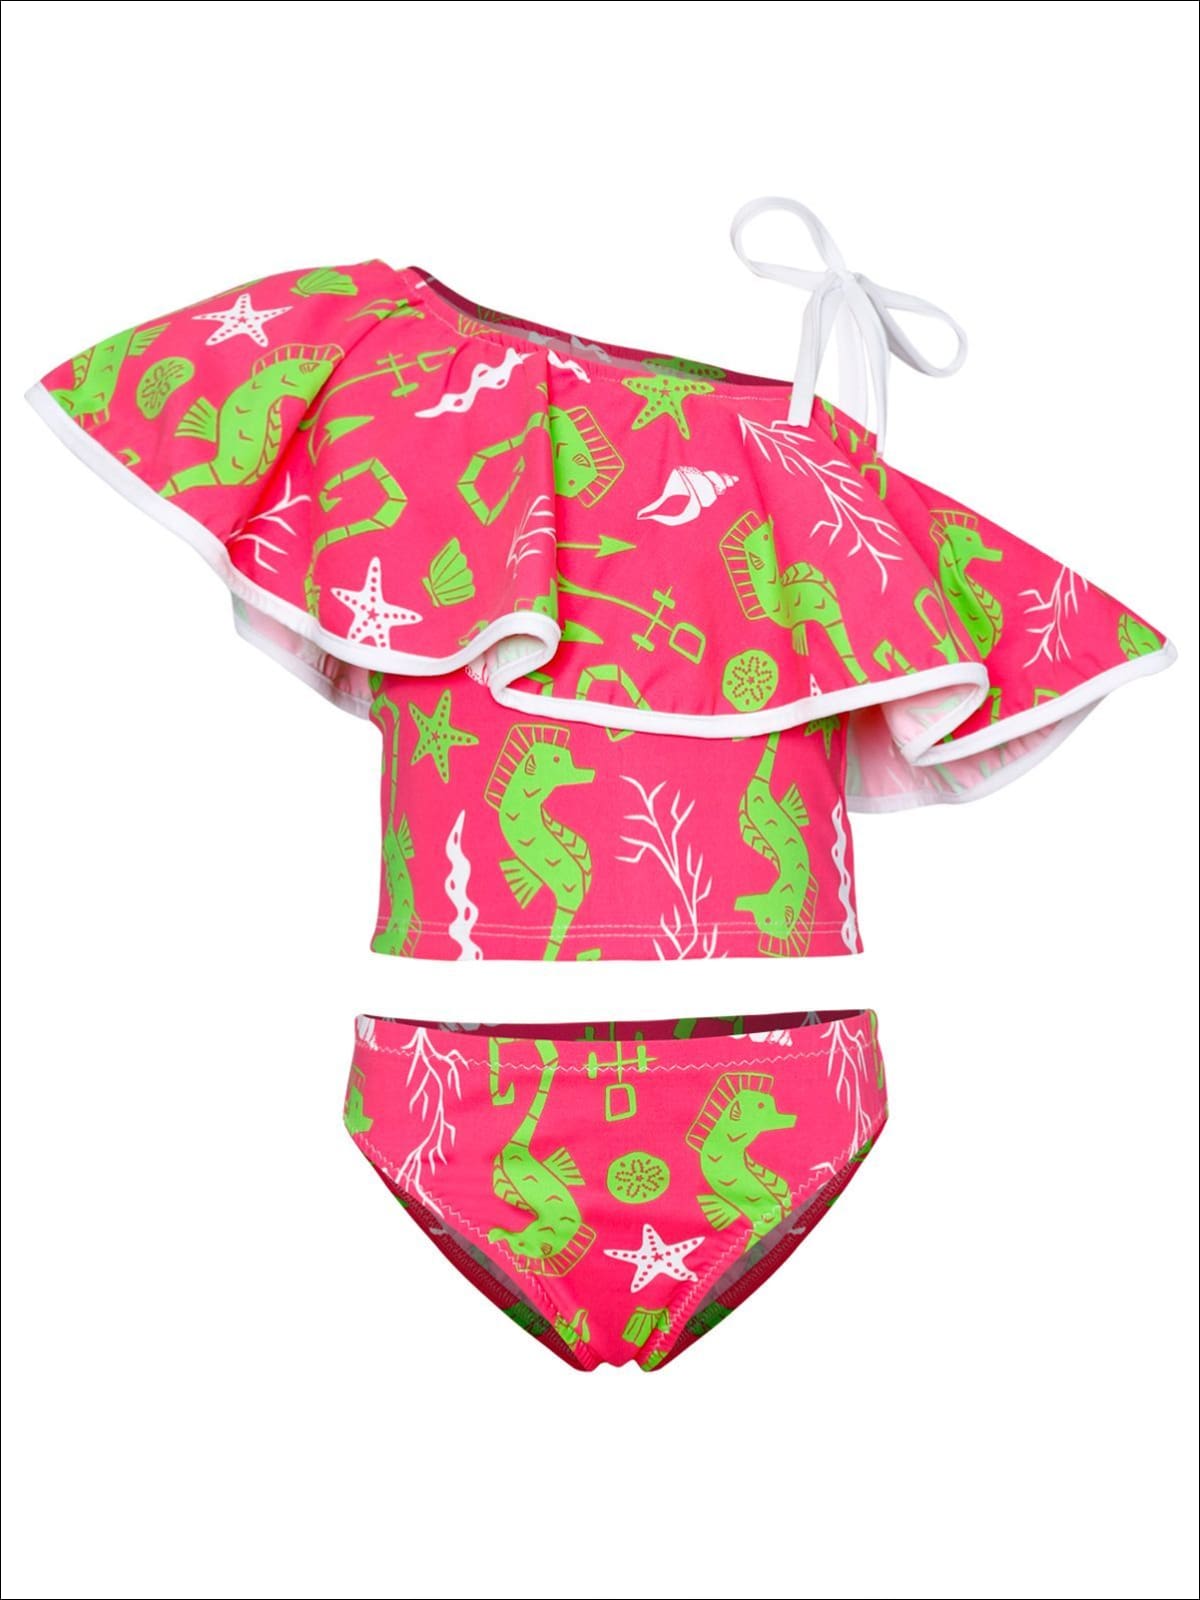 Girls Printed One Shoulder Ruffle Top & High Waist Bottom Two Piece Swimsuit - Pink / 2T/3T - Girls Two Piece Swimsuit